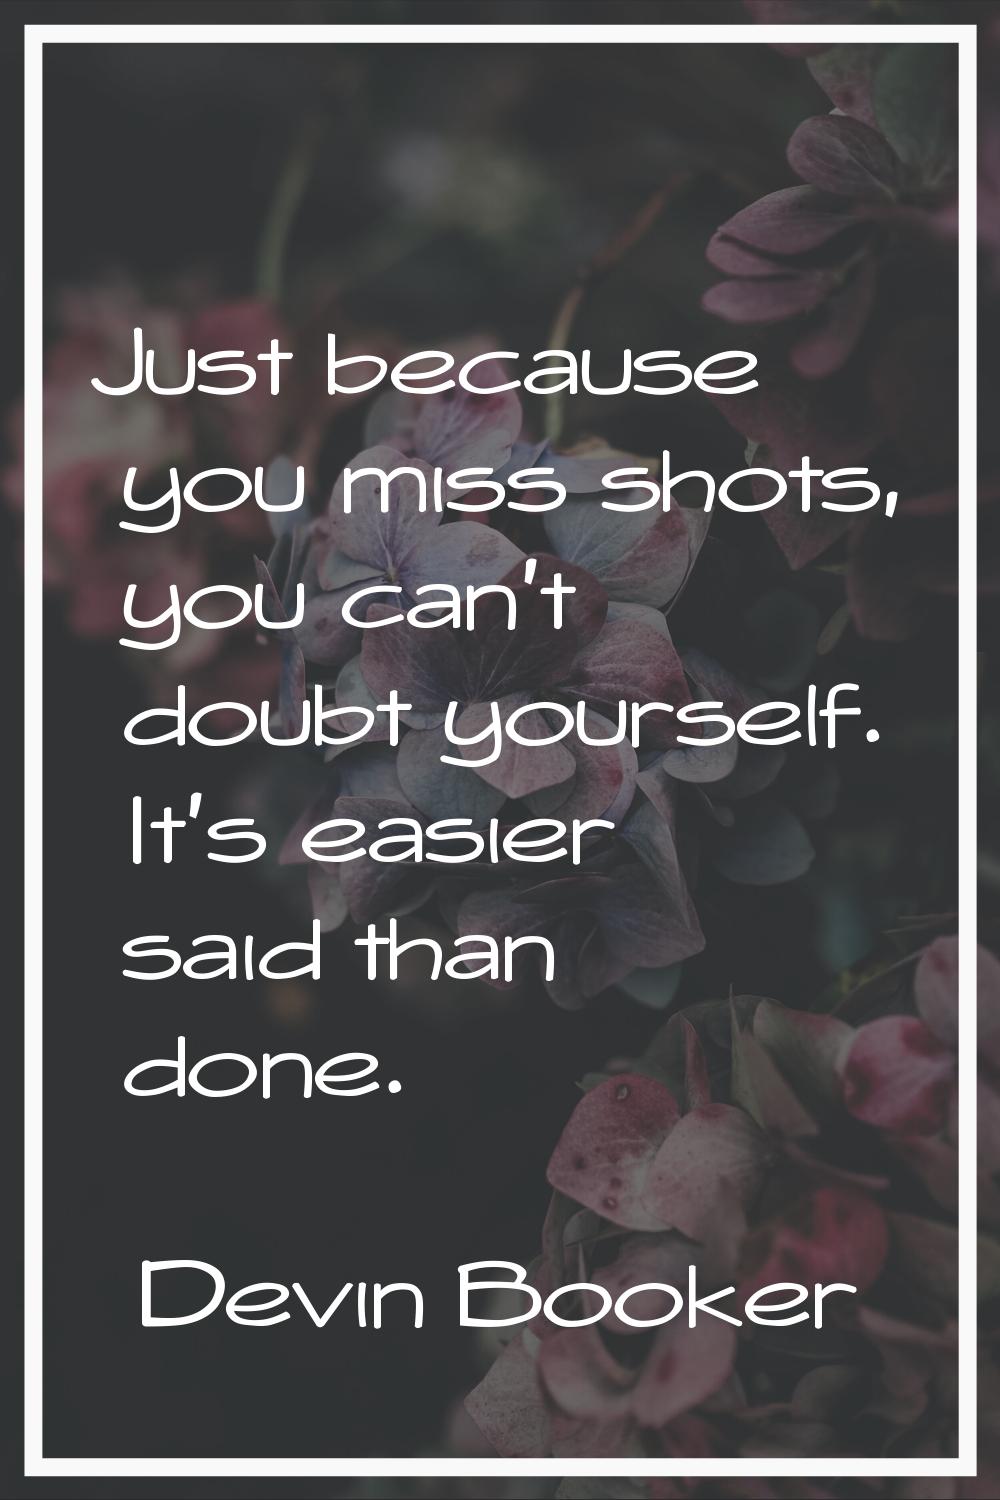 Just because you miss shots, you can't doubt yourself. It's easier said than done.